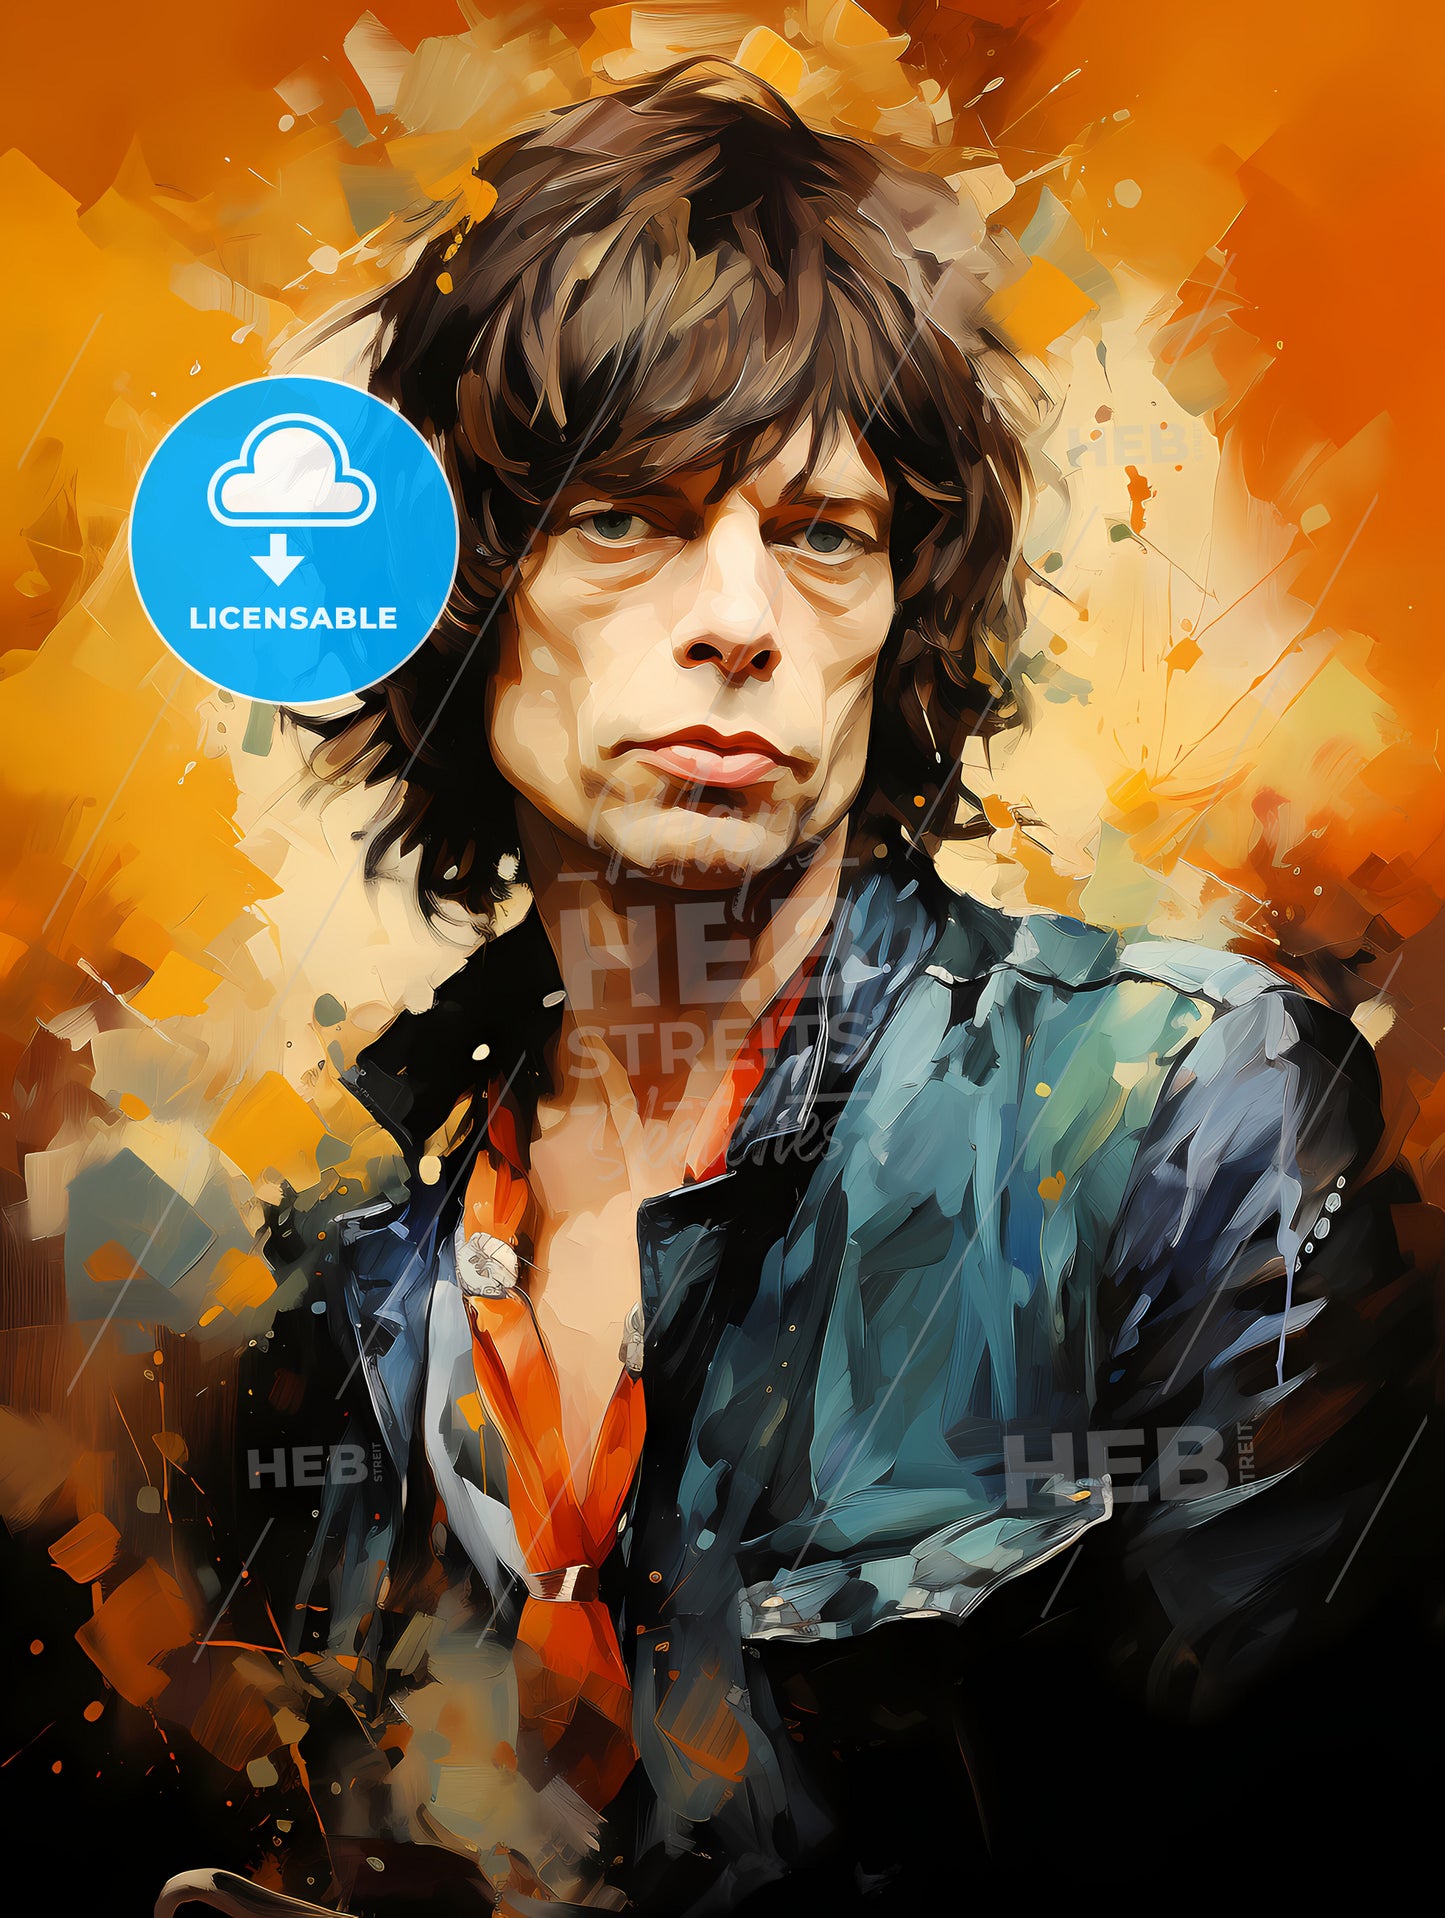 Mick Jagger English singer and songwriter